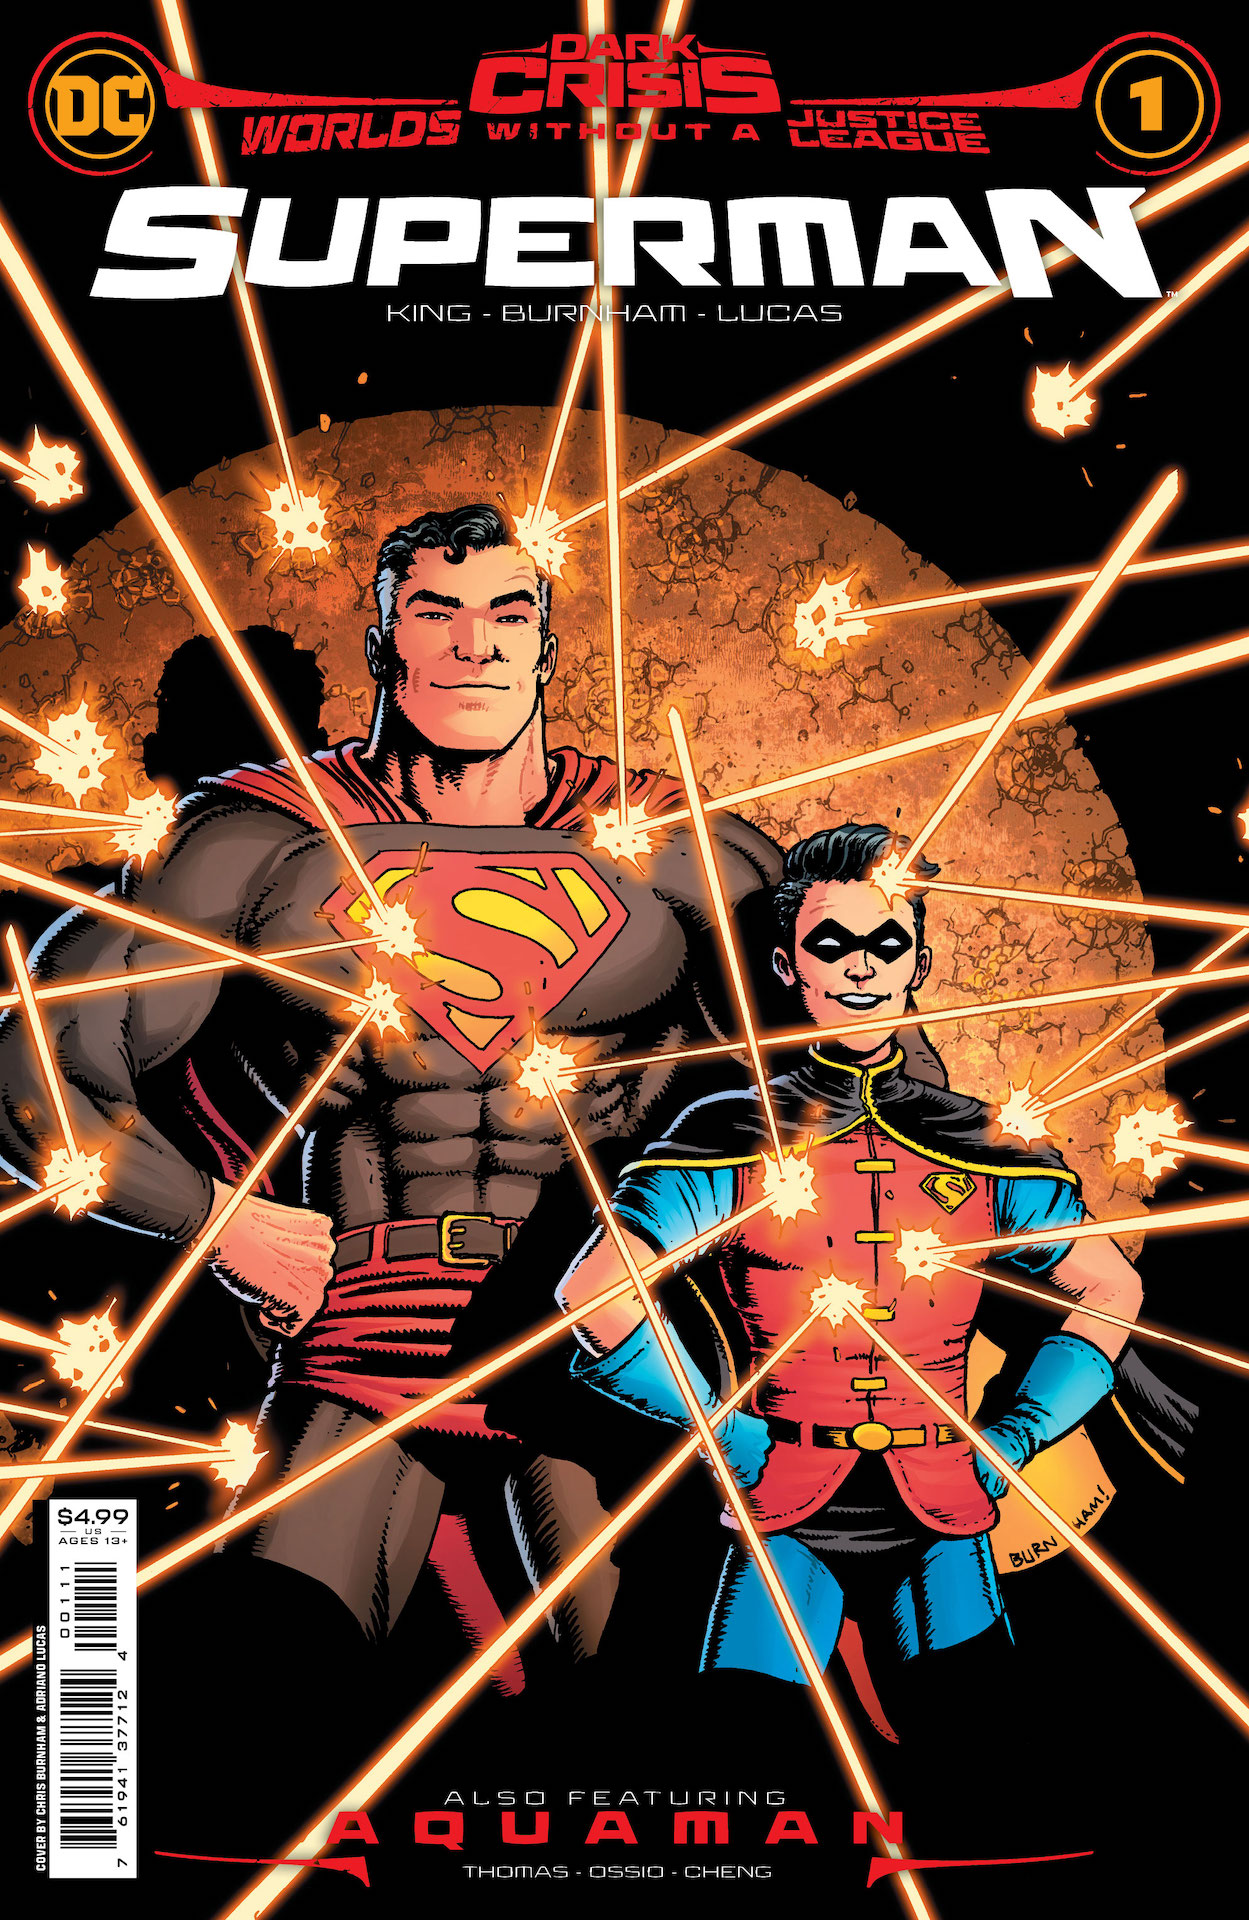 DC Preview: Dark Crisis: Worlds Without a Justice League - Superman #1